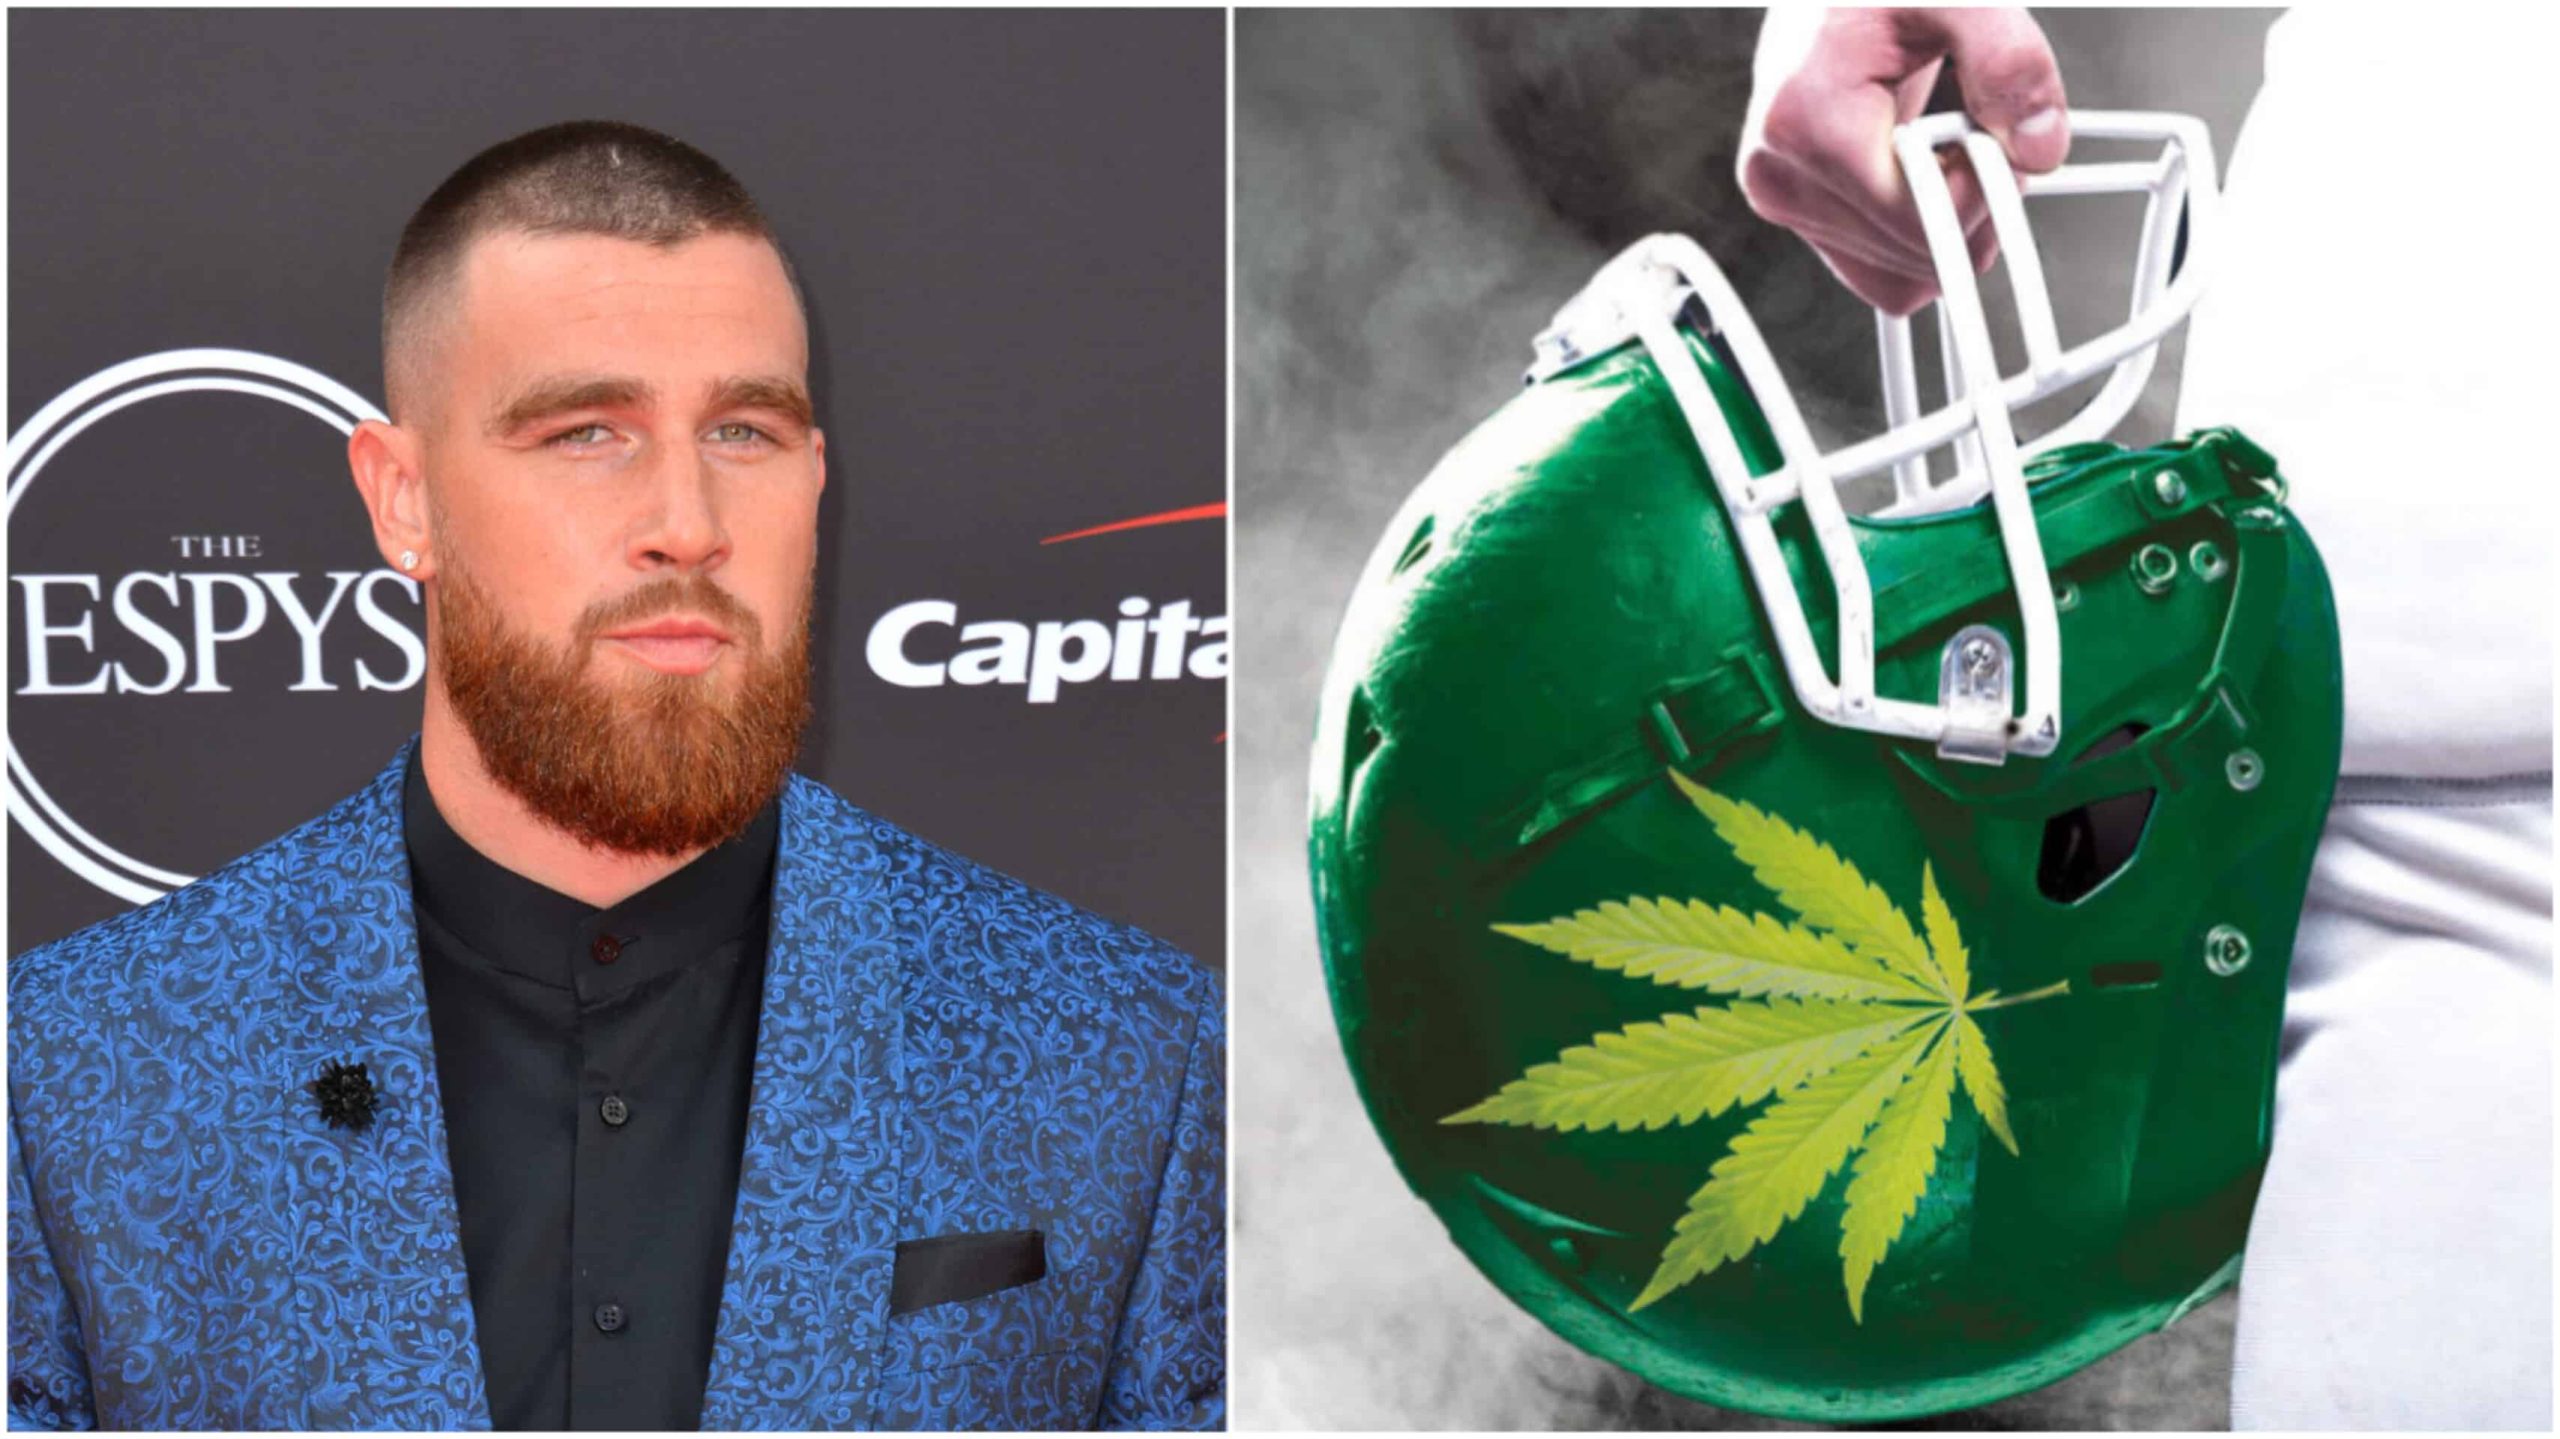 Travis Kelce Estimates Up to 80% of NFL Players Smoke Pot, Others Say It’s Higher